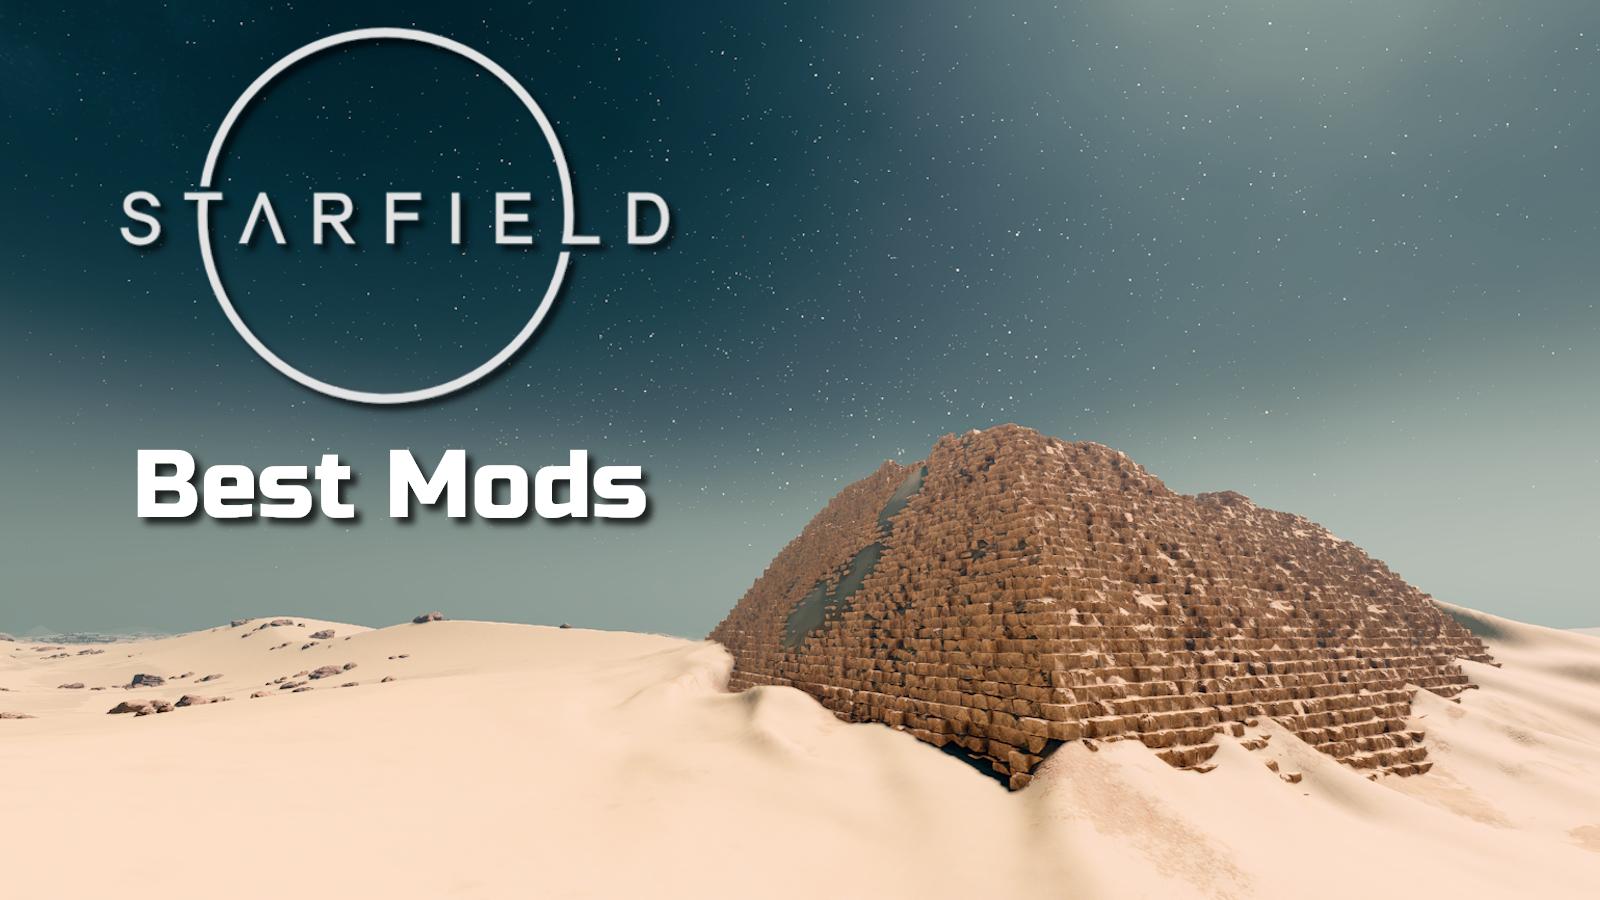 Starfield pyramids with game logo and best mods header text.